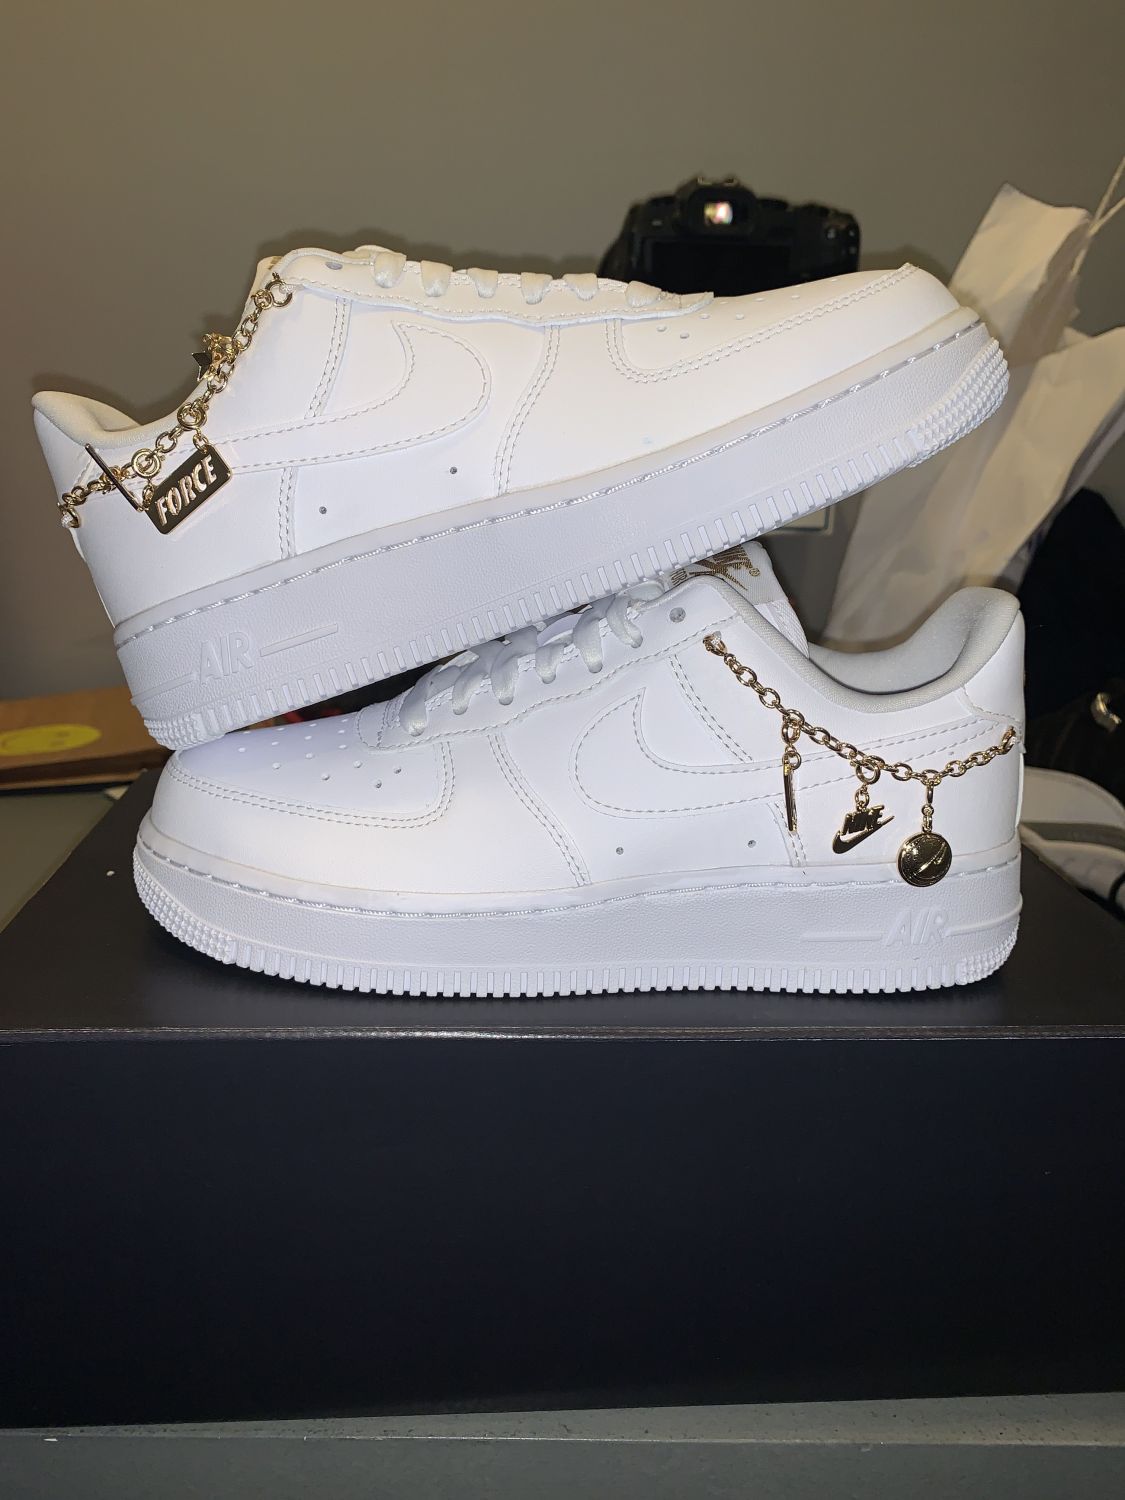 1339 - Nike Air Force 1 Low LX White Pendant (W) | Item Details